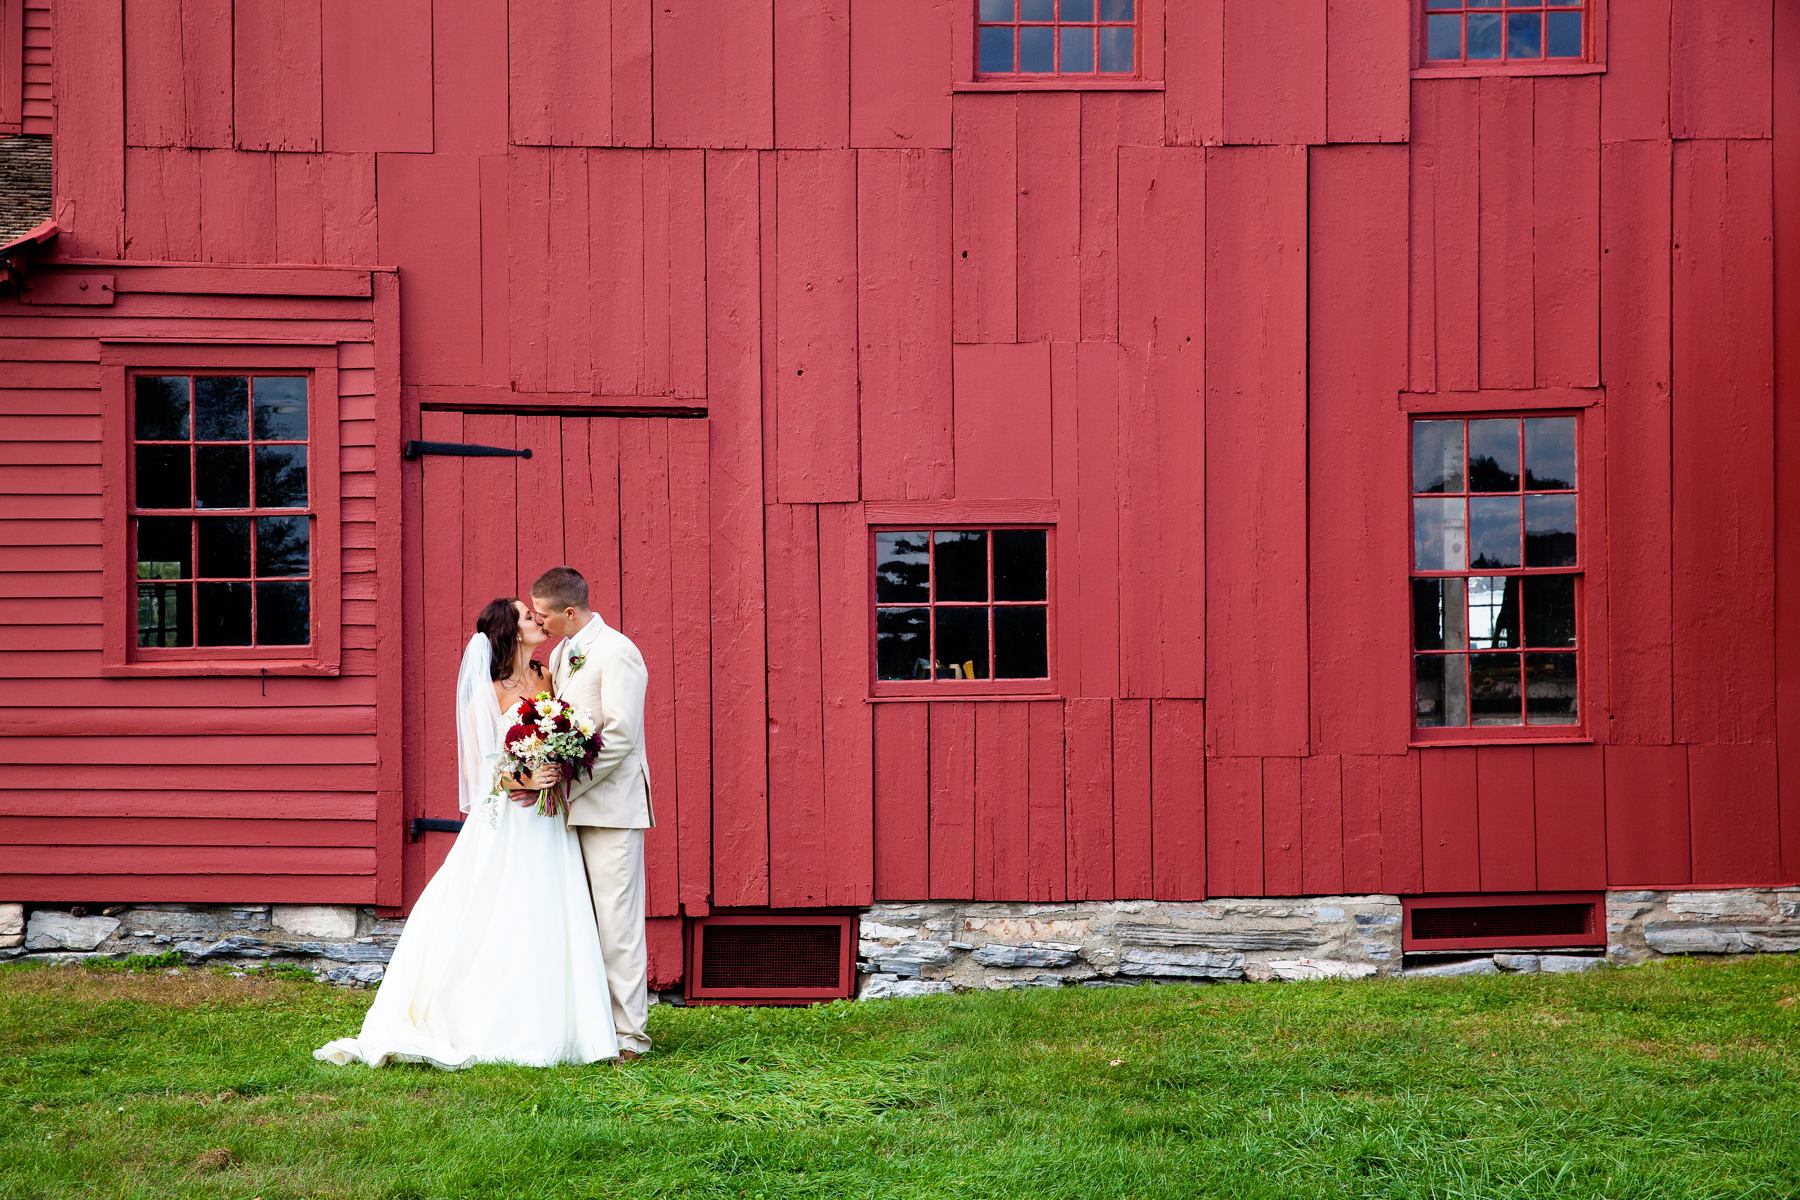 The bride and groom sharing a kiss in front of a red barn at hancock shaker village